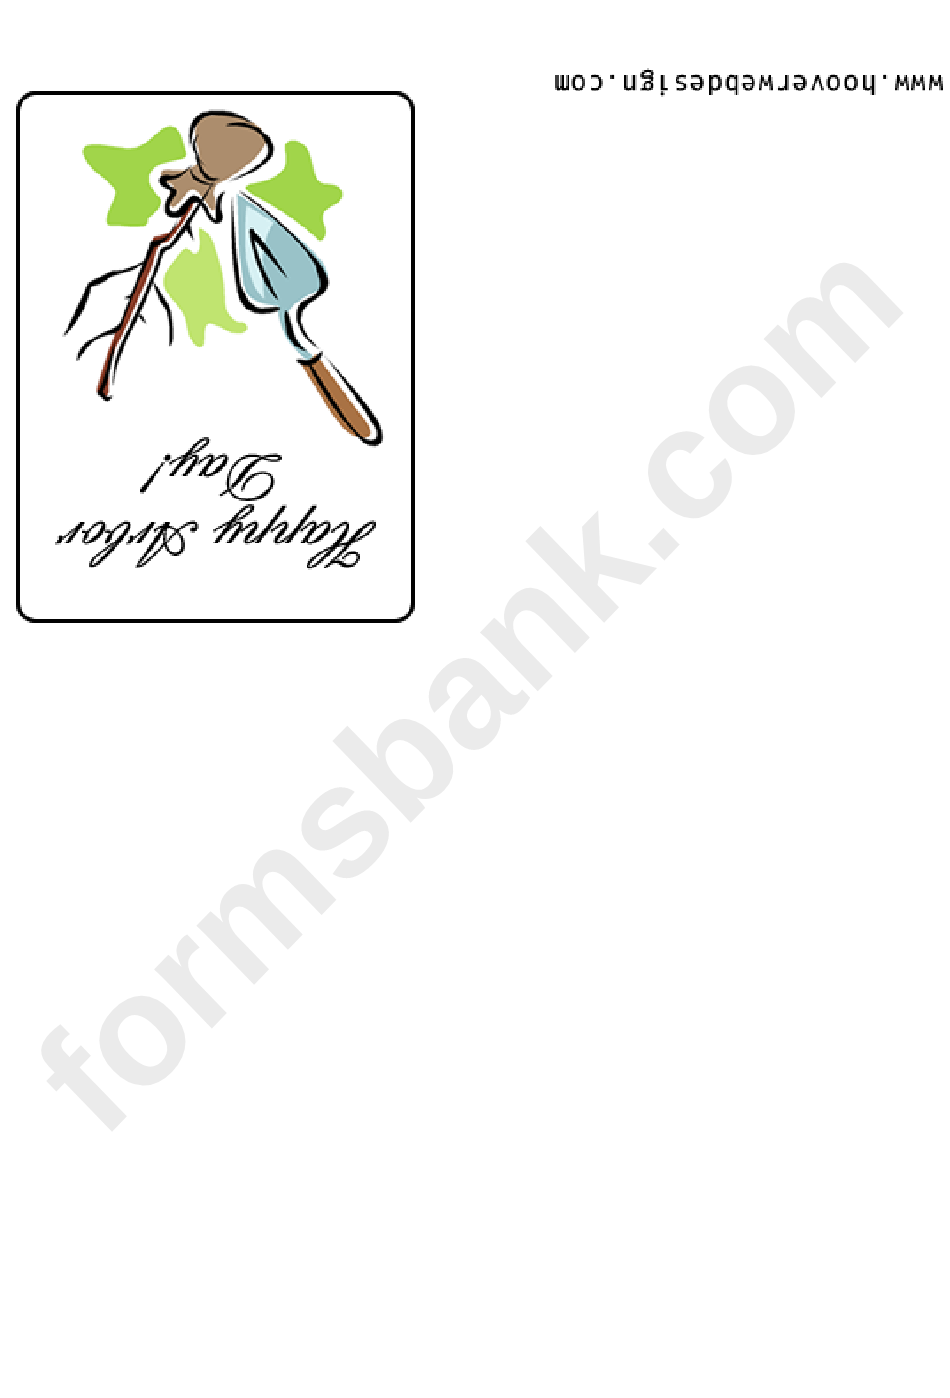 Arbor Day - Card Template